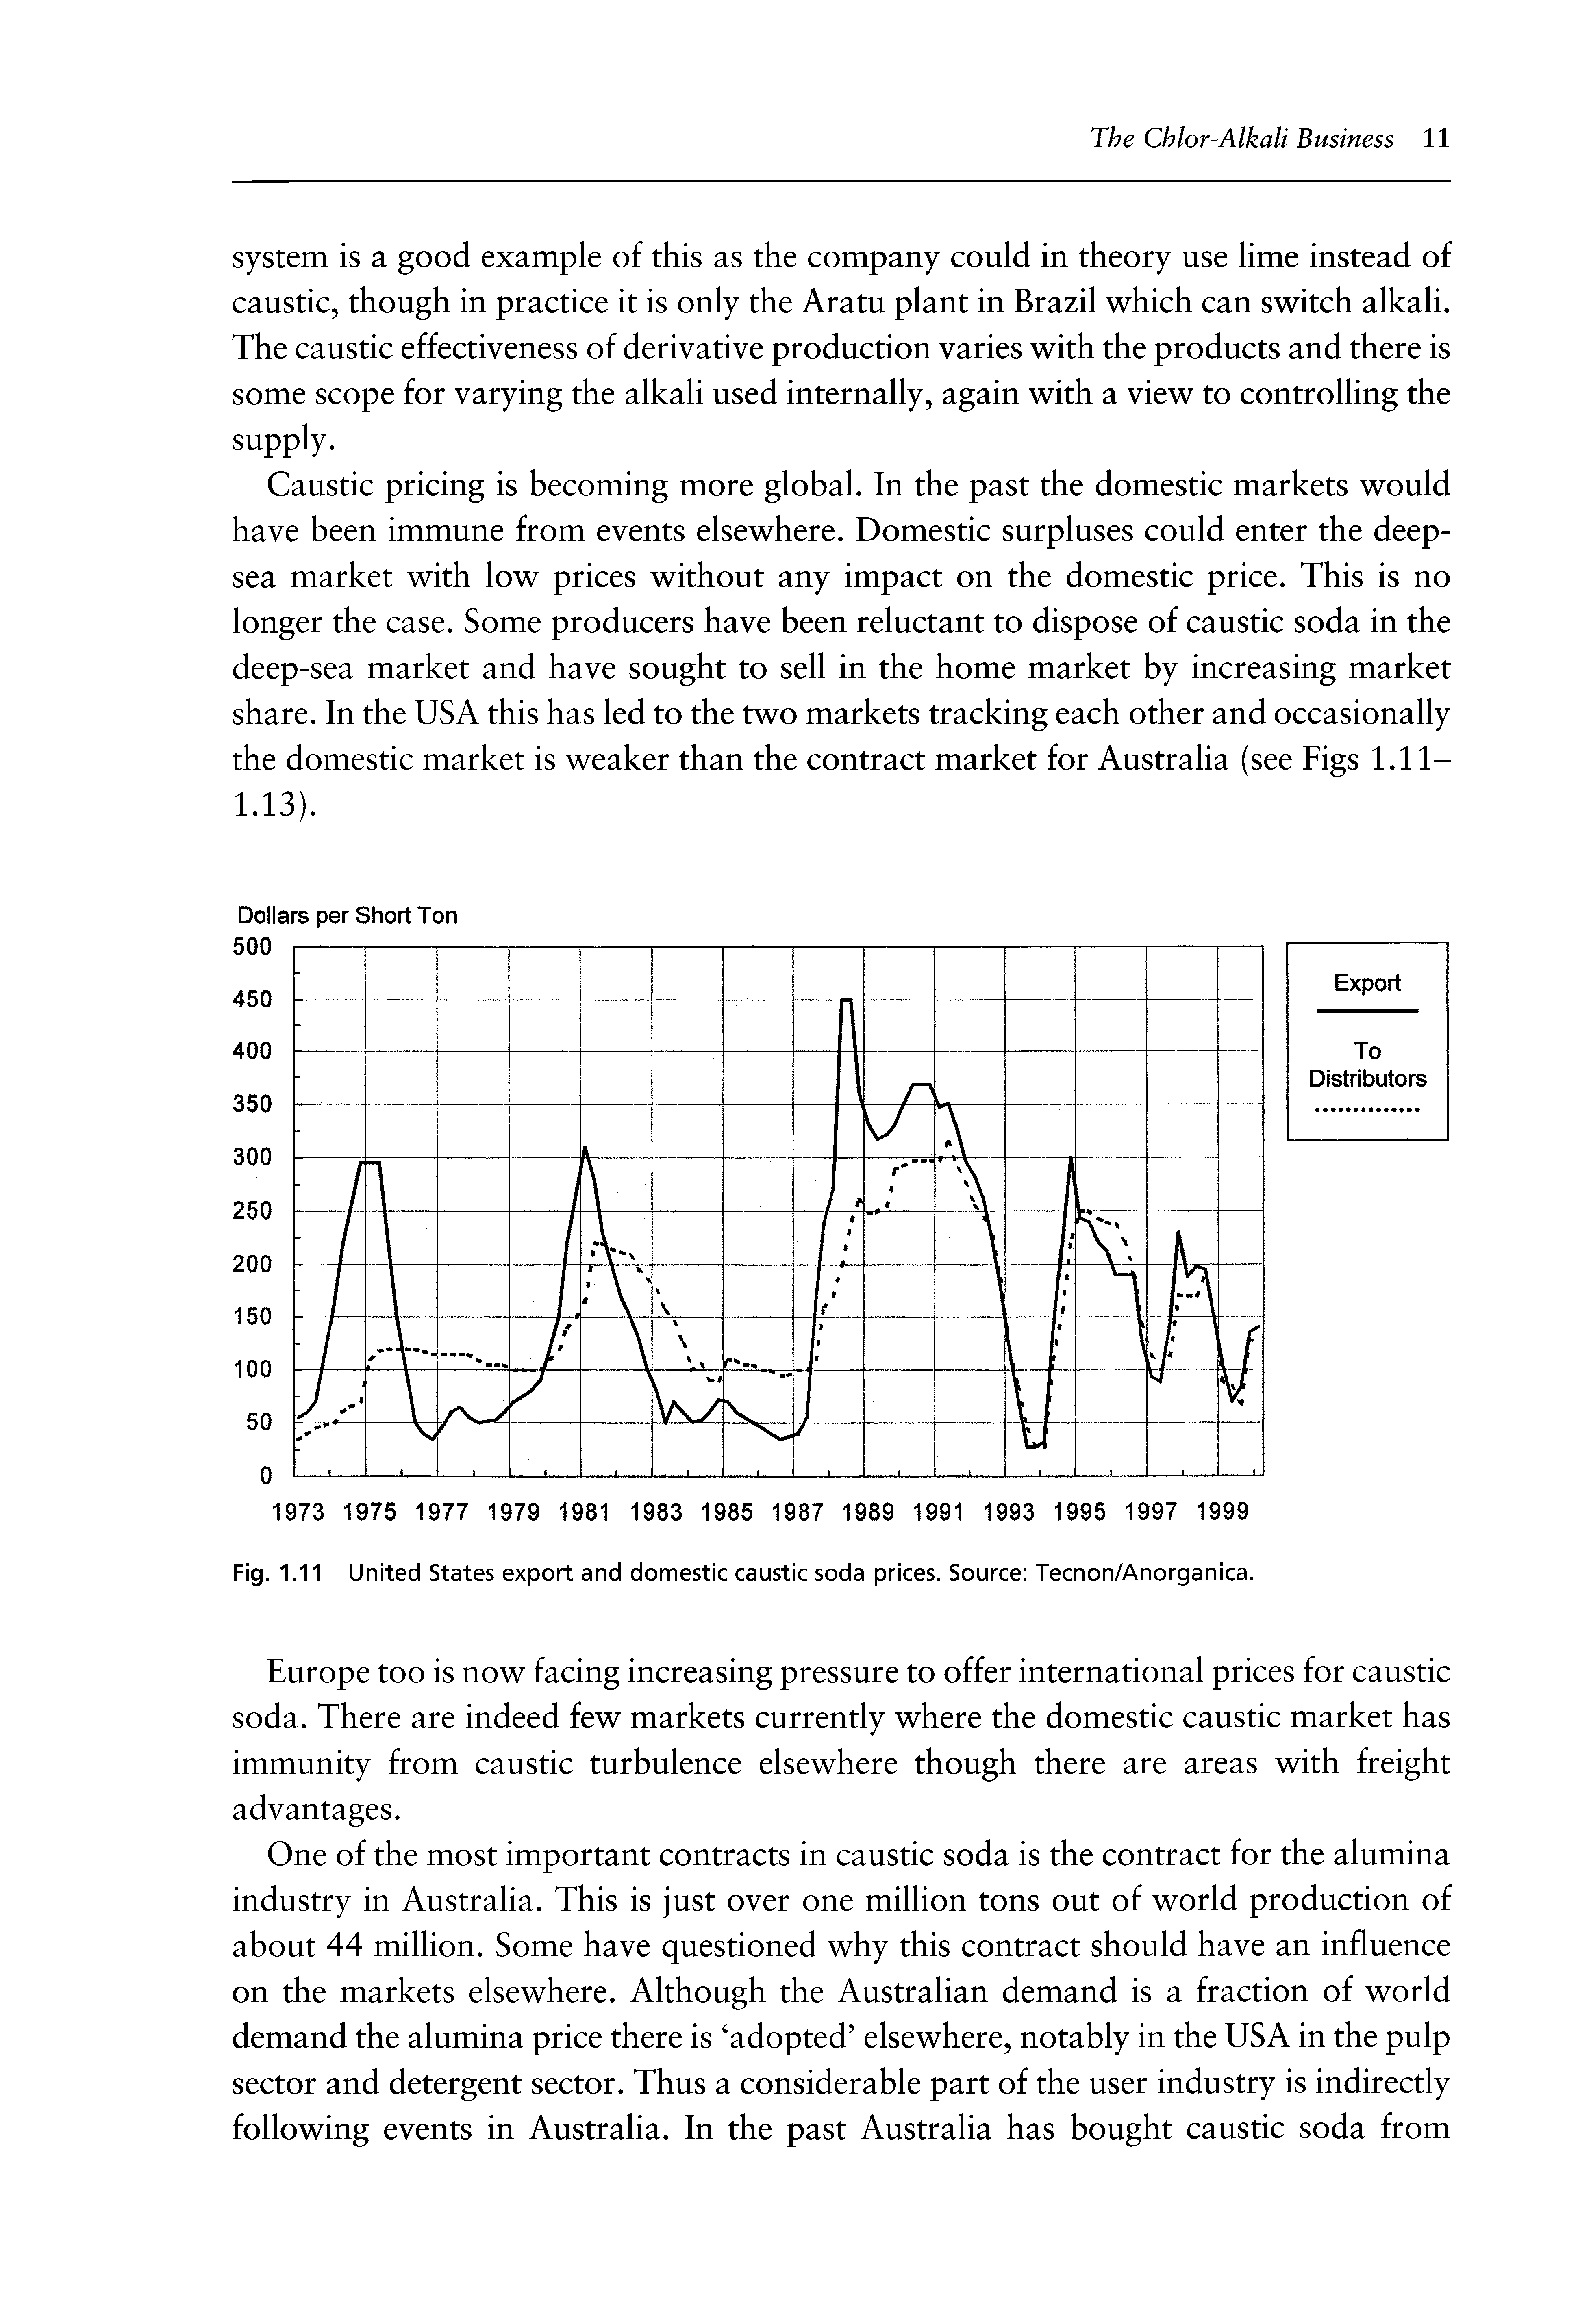 Fig. 1.11 United States export and domestic caustic soda prices. Source Tecnon/Anorganica.